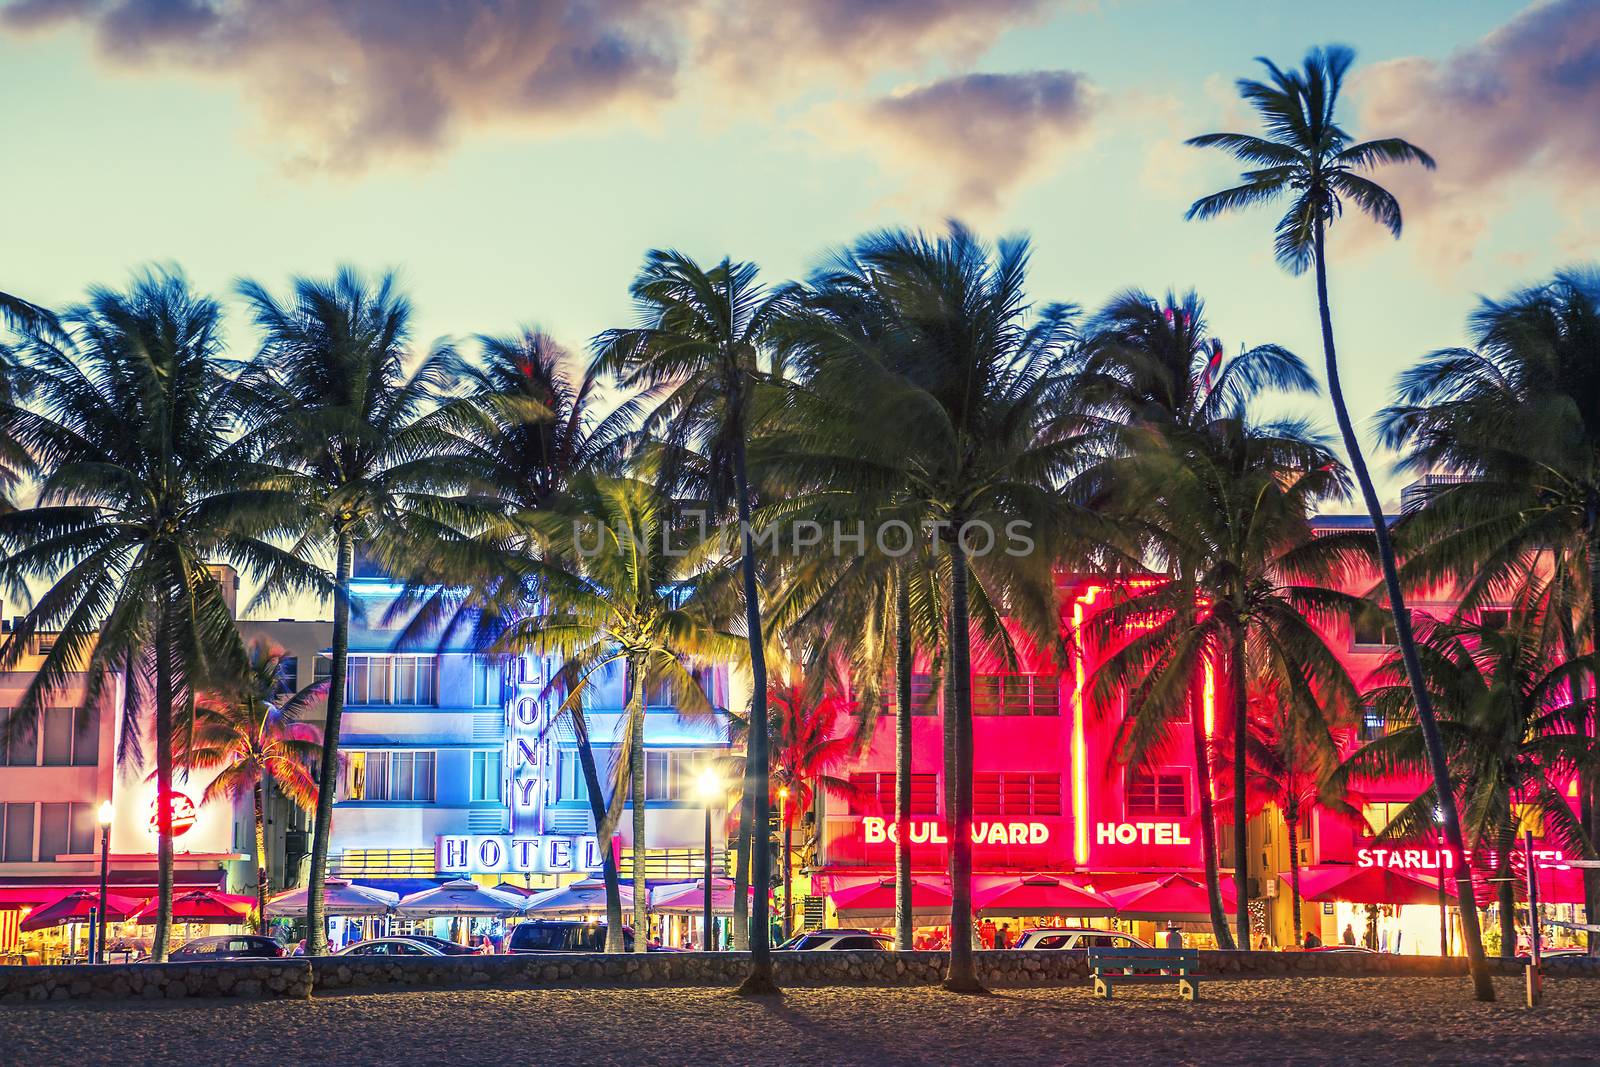 Miami Beach, Florida hotels and restaurants at sunset on Ocean Drive, world famous destination for it's nightlife. January 24, 2014. Special photographic processing.